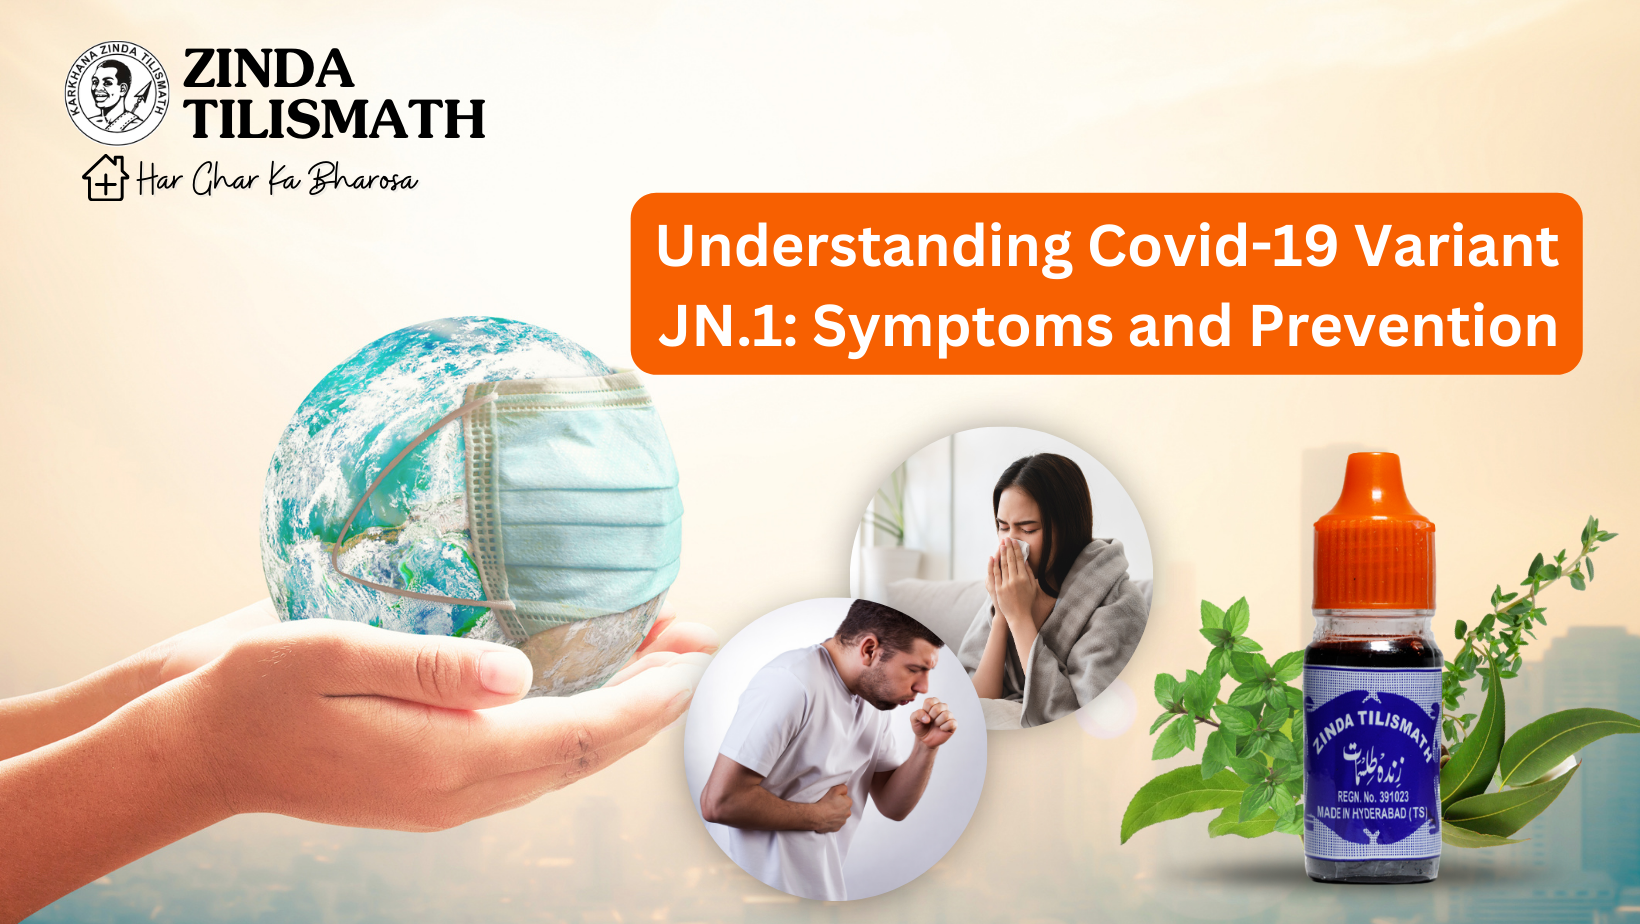 Understanding Covid-19 Variant JN.1: Symptoms and Prevention